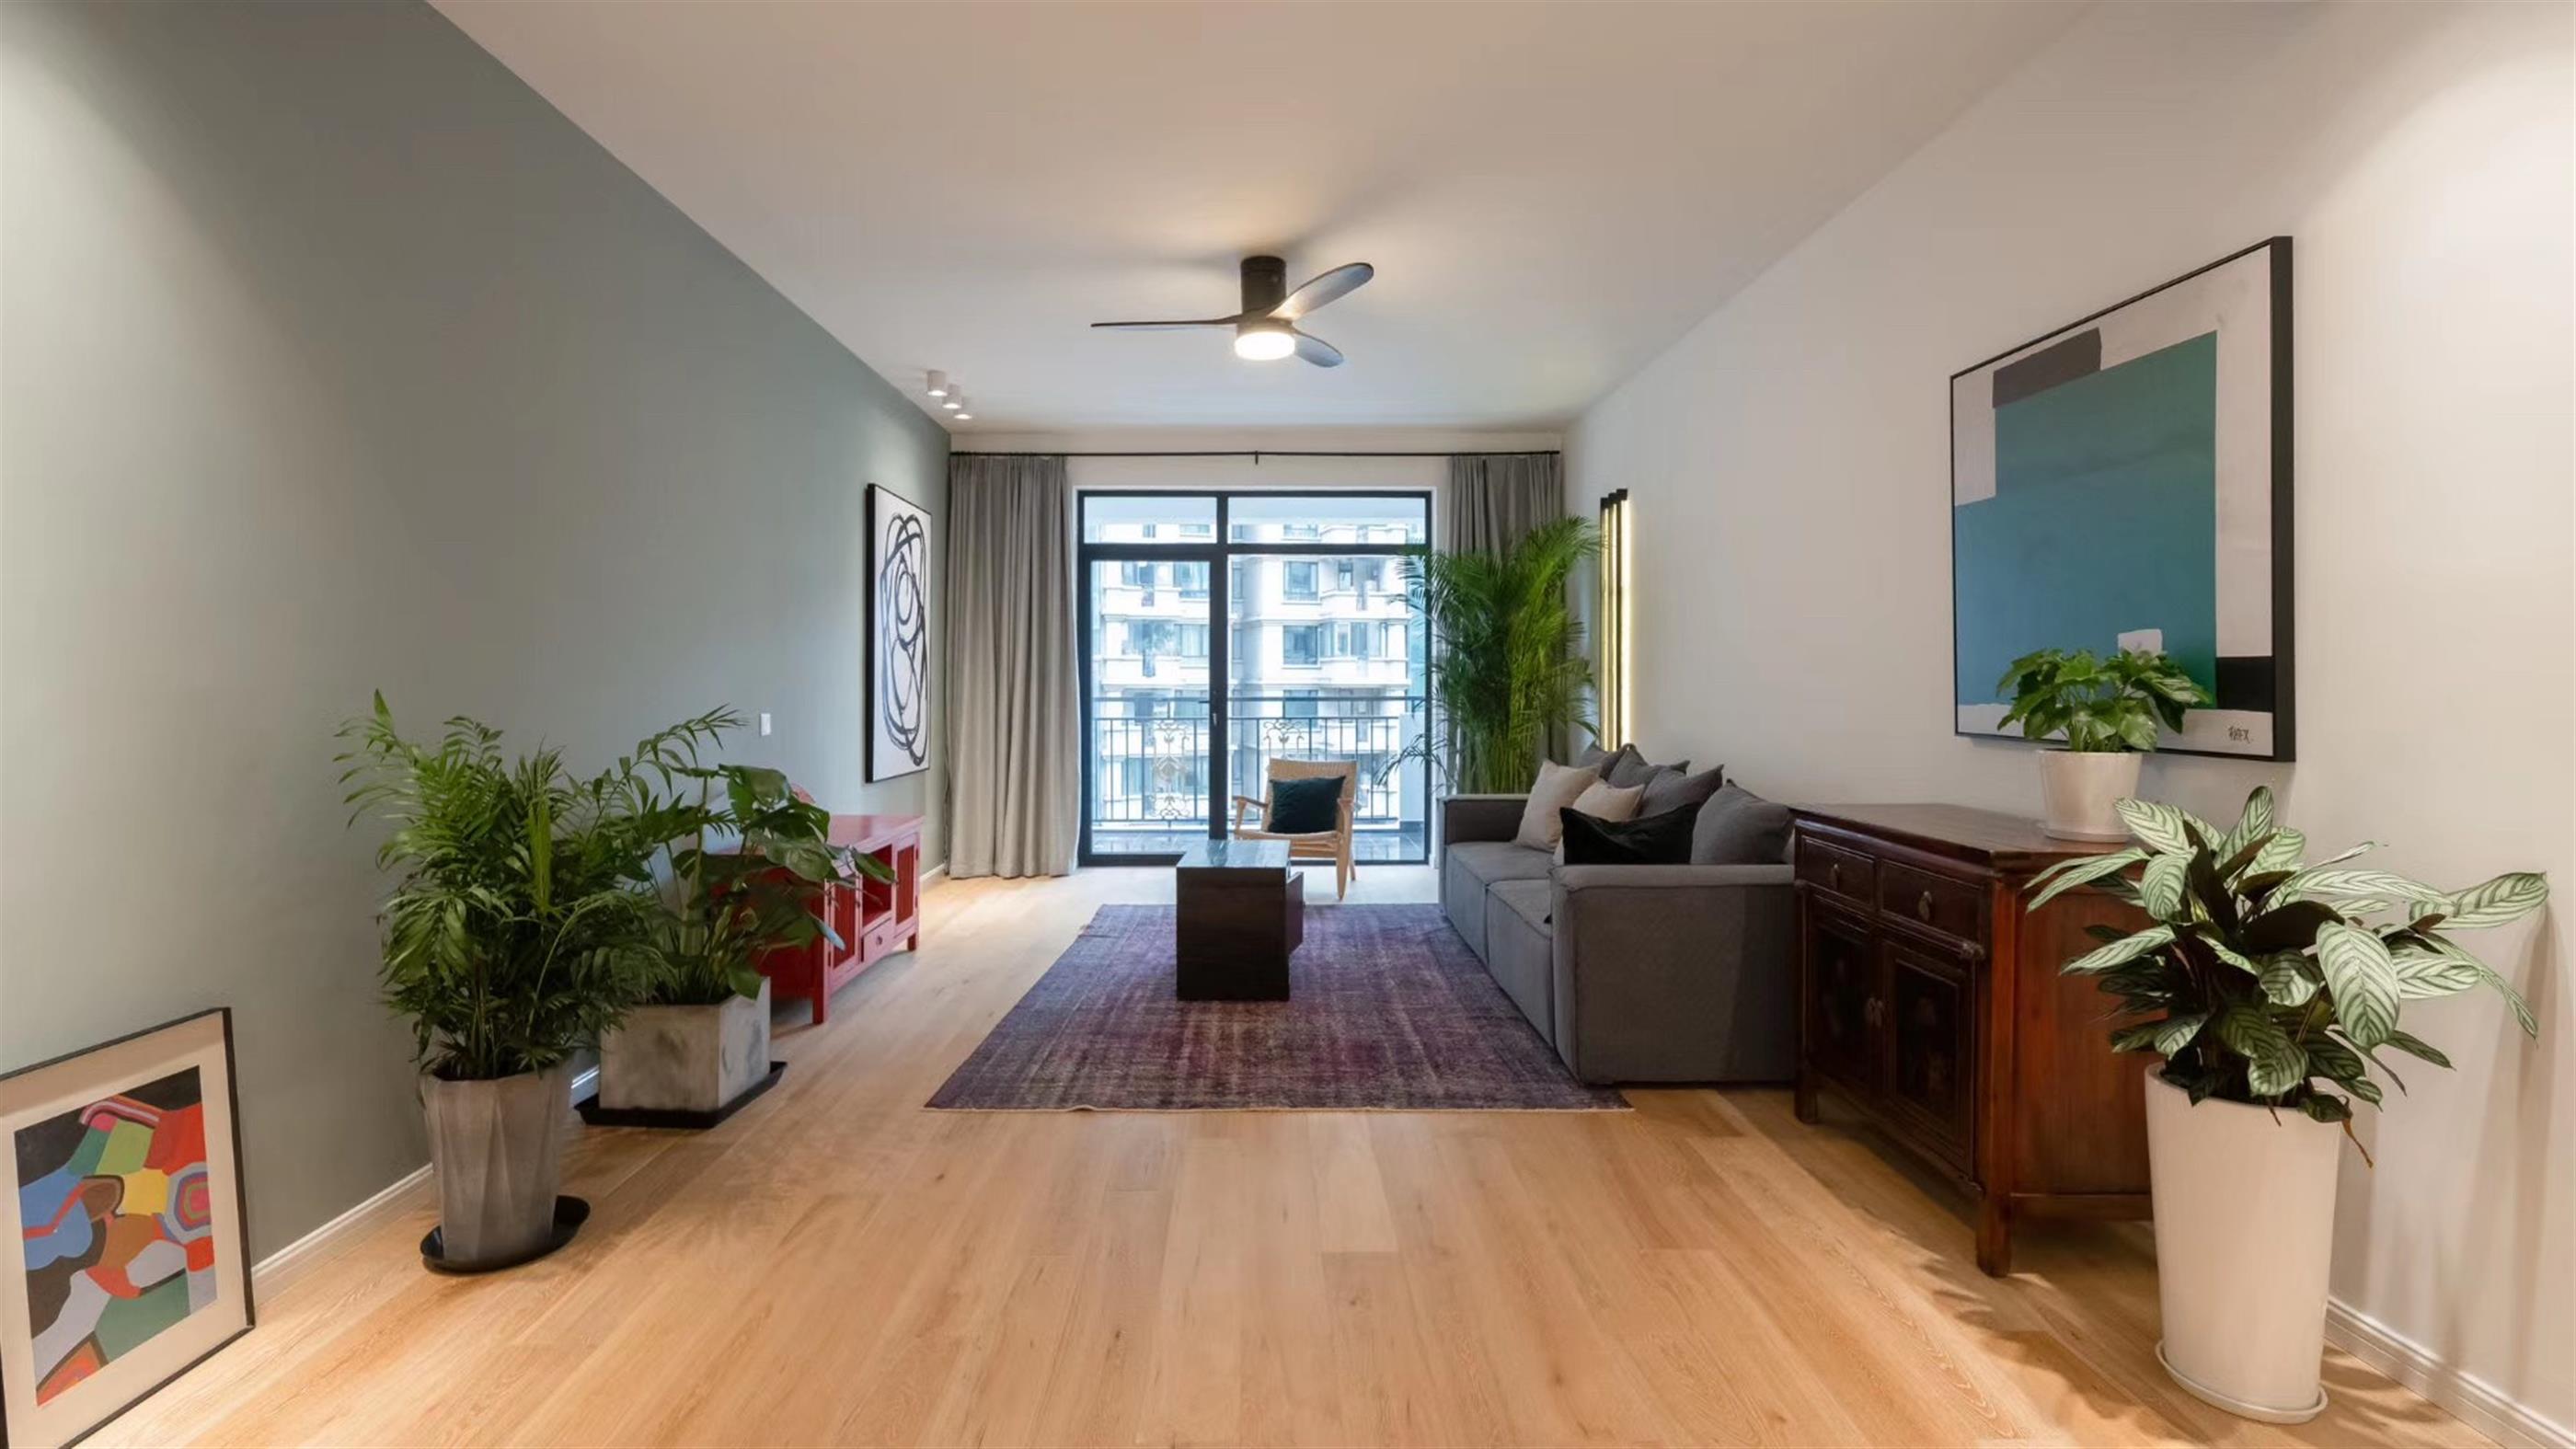 open rooms Newly Renovated Chic Modern 170sqm 3BR Apartment for Rent nr Suzhou Creek in Shanghai